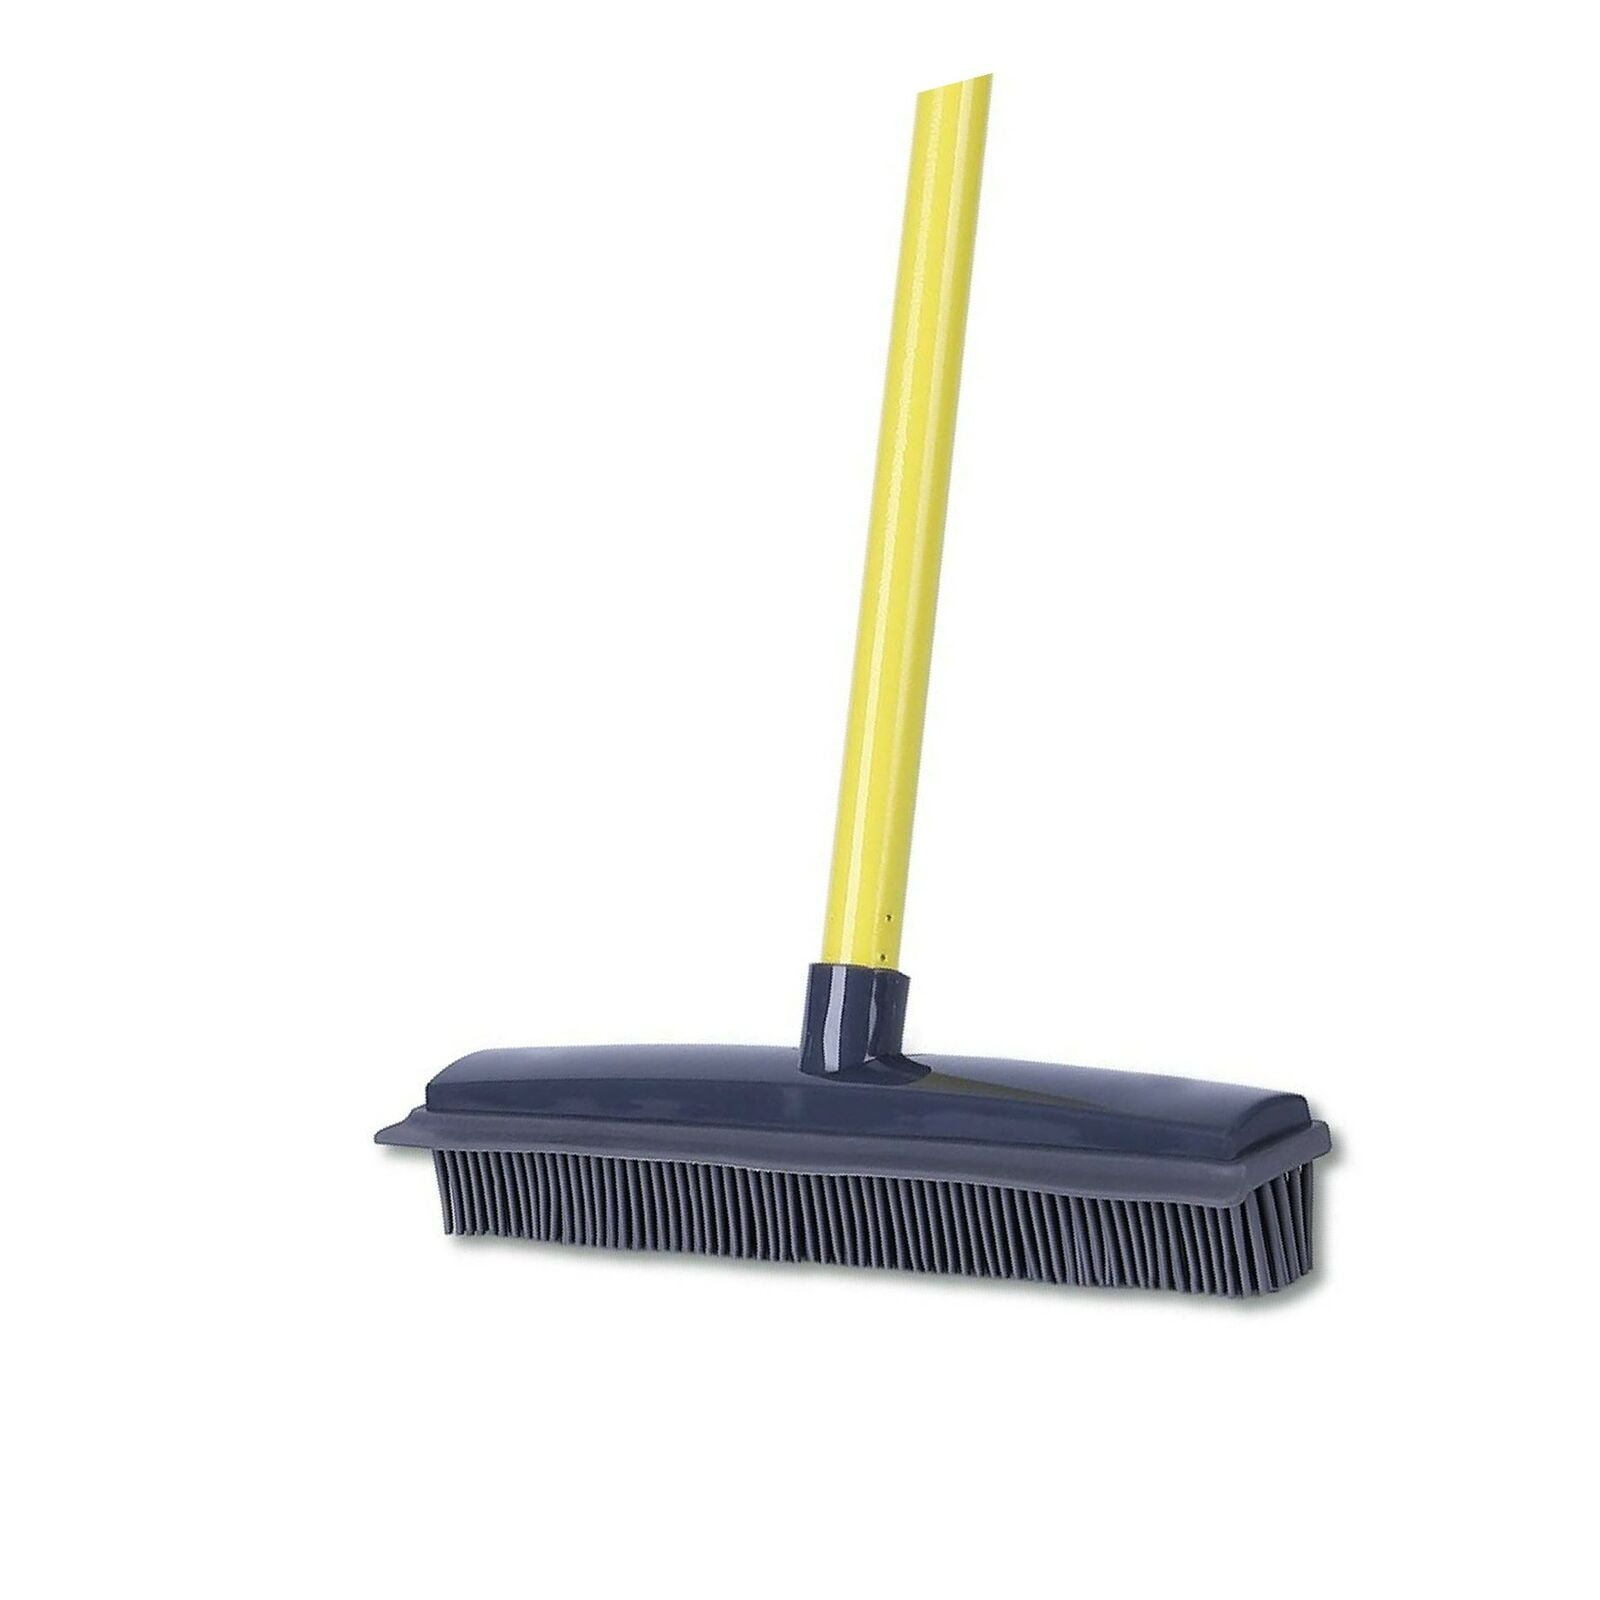 Soft Bristle Rubber Sweeper Squeegee Edge with 59 inches Adjustab... Push Broom 